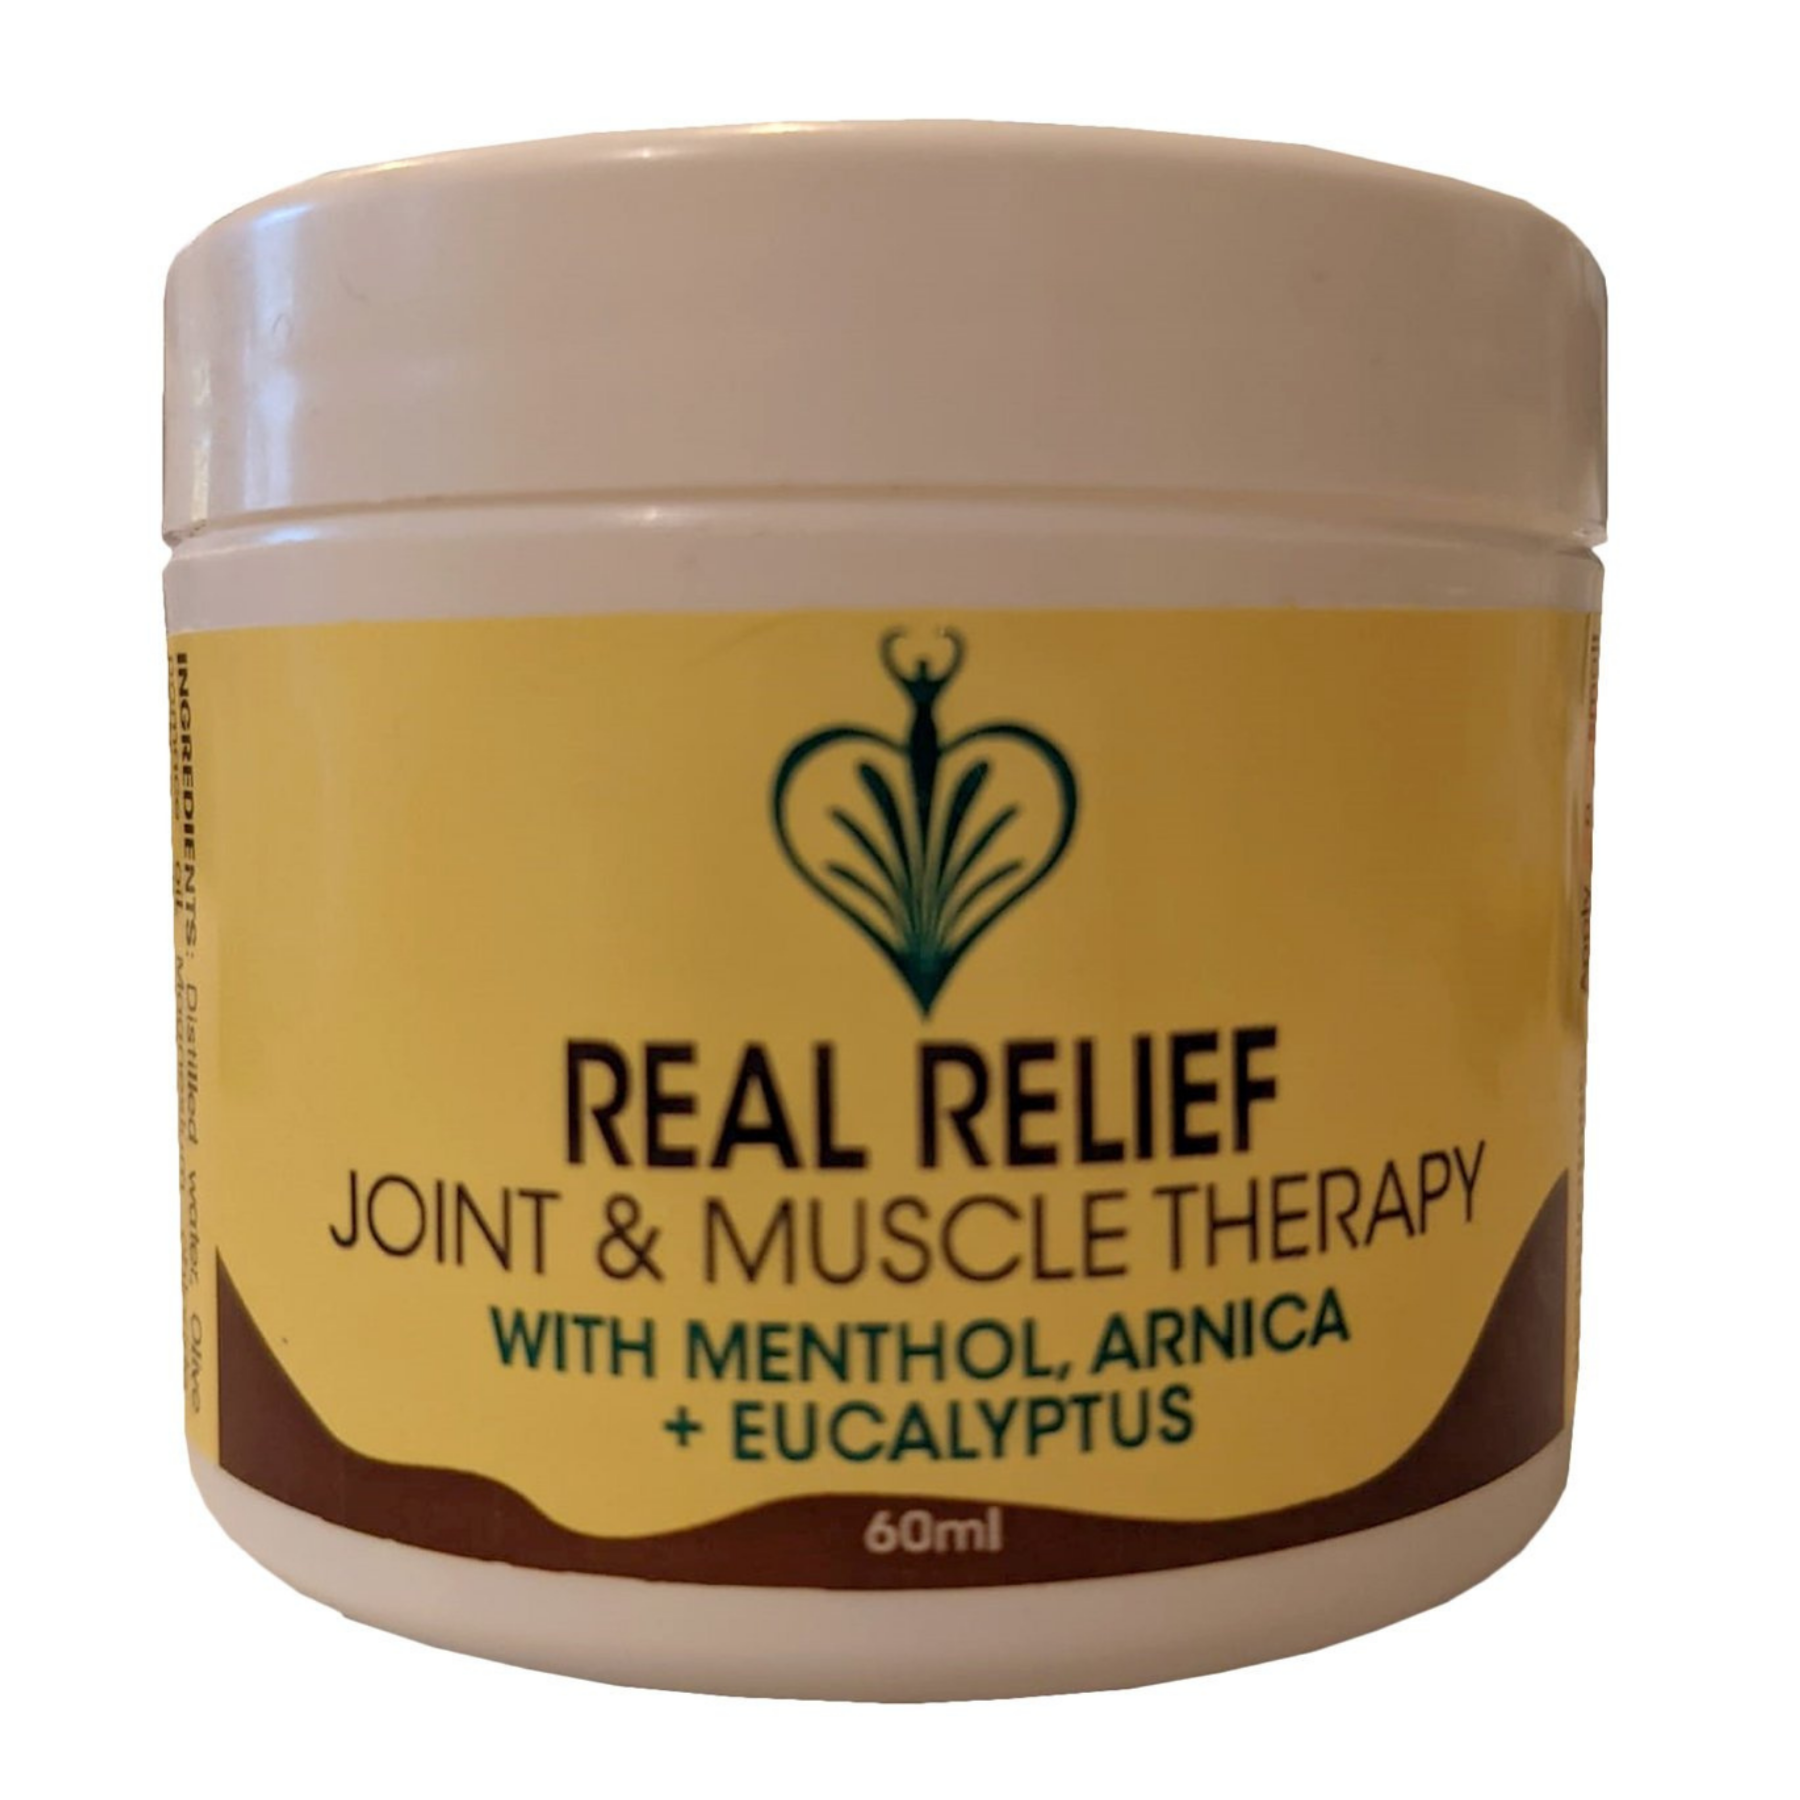 Real Relief Joint & Muscle Therapy By Shea Butter Market.